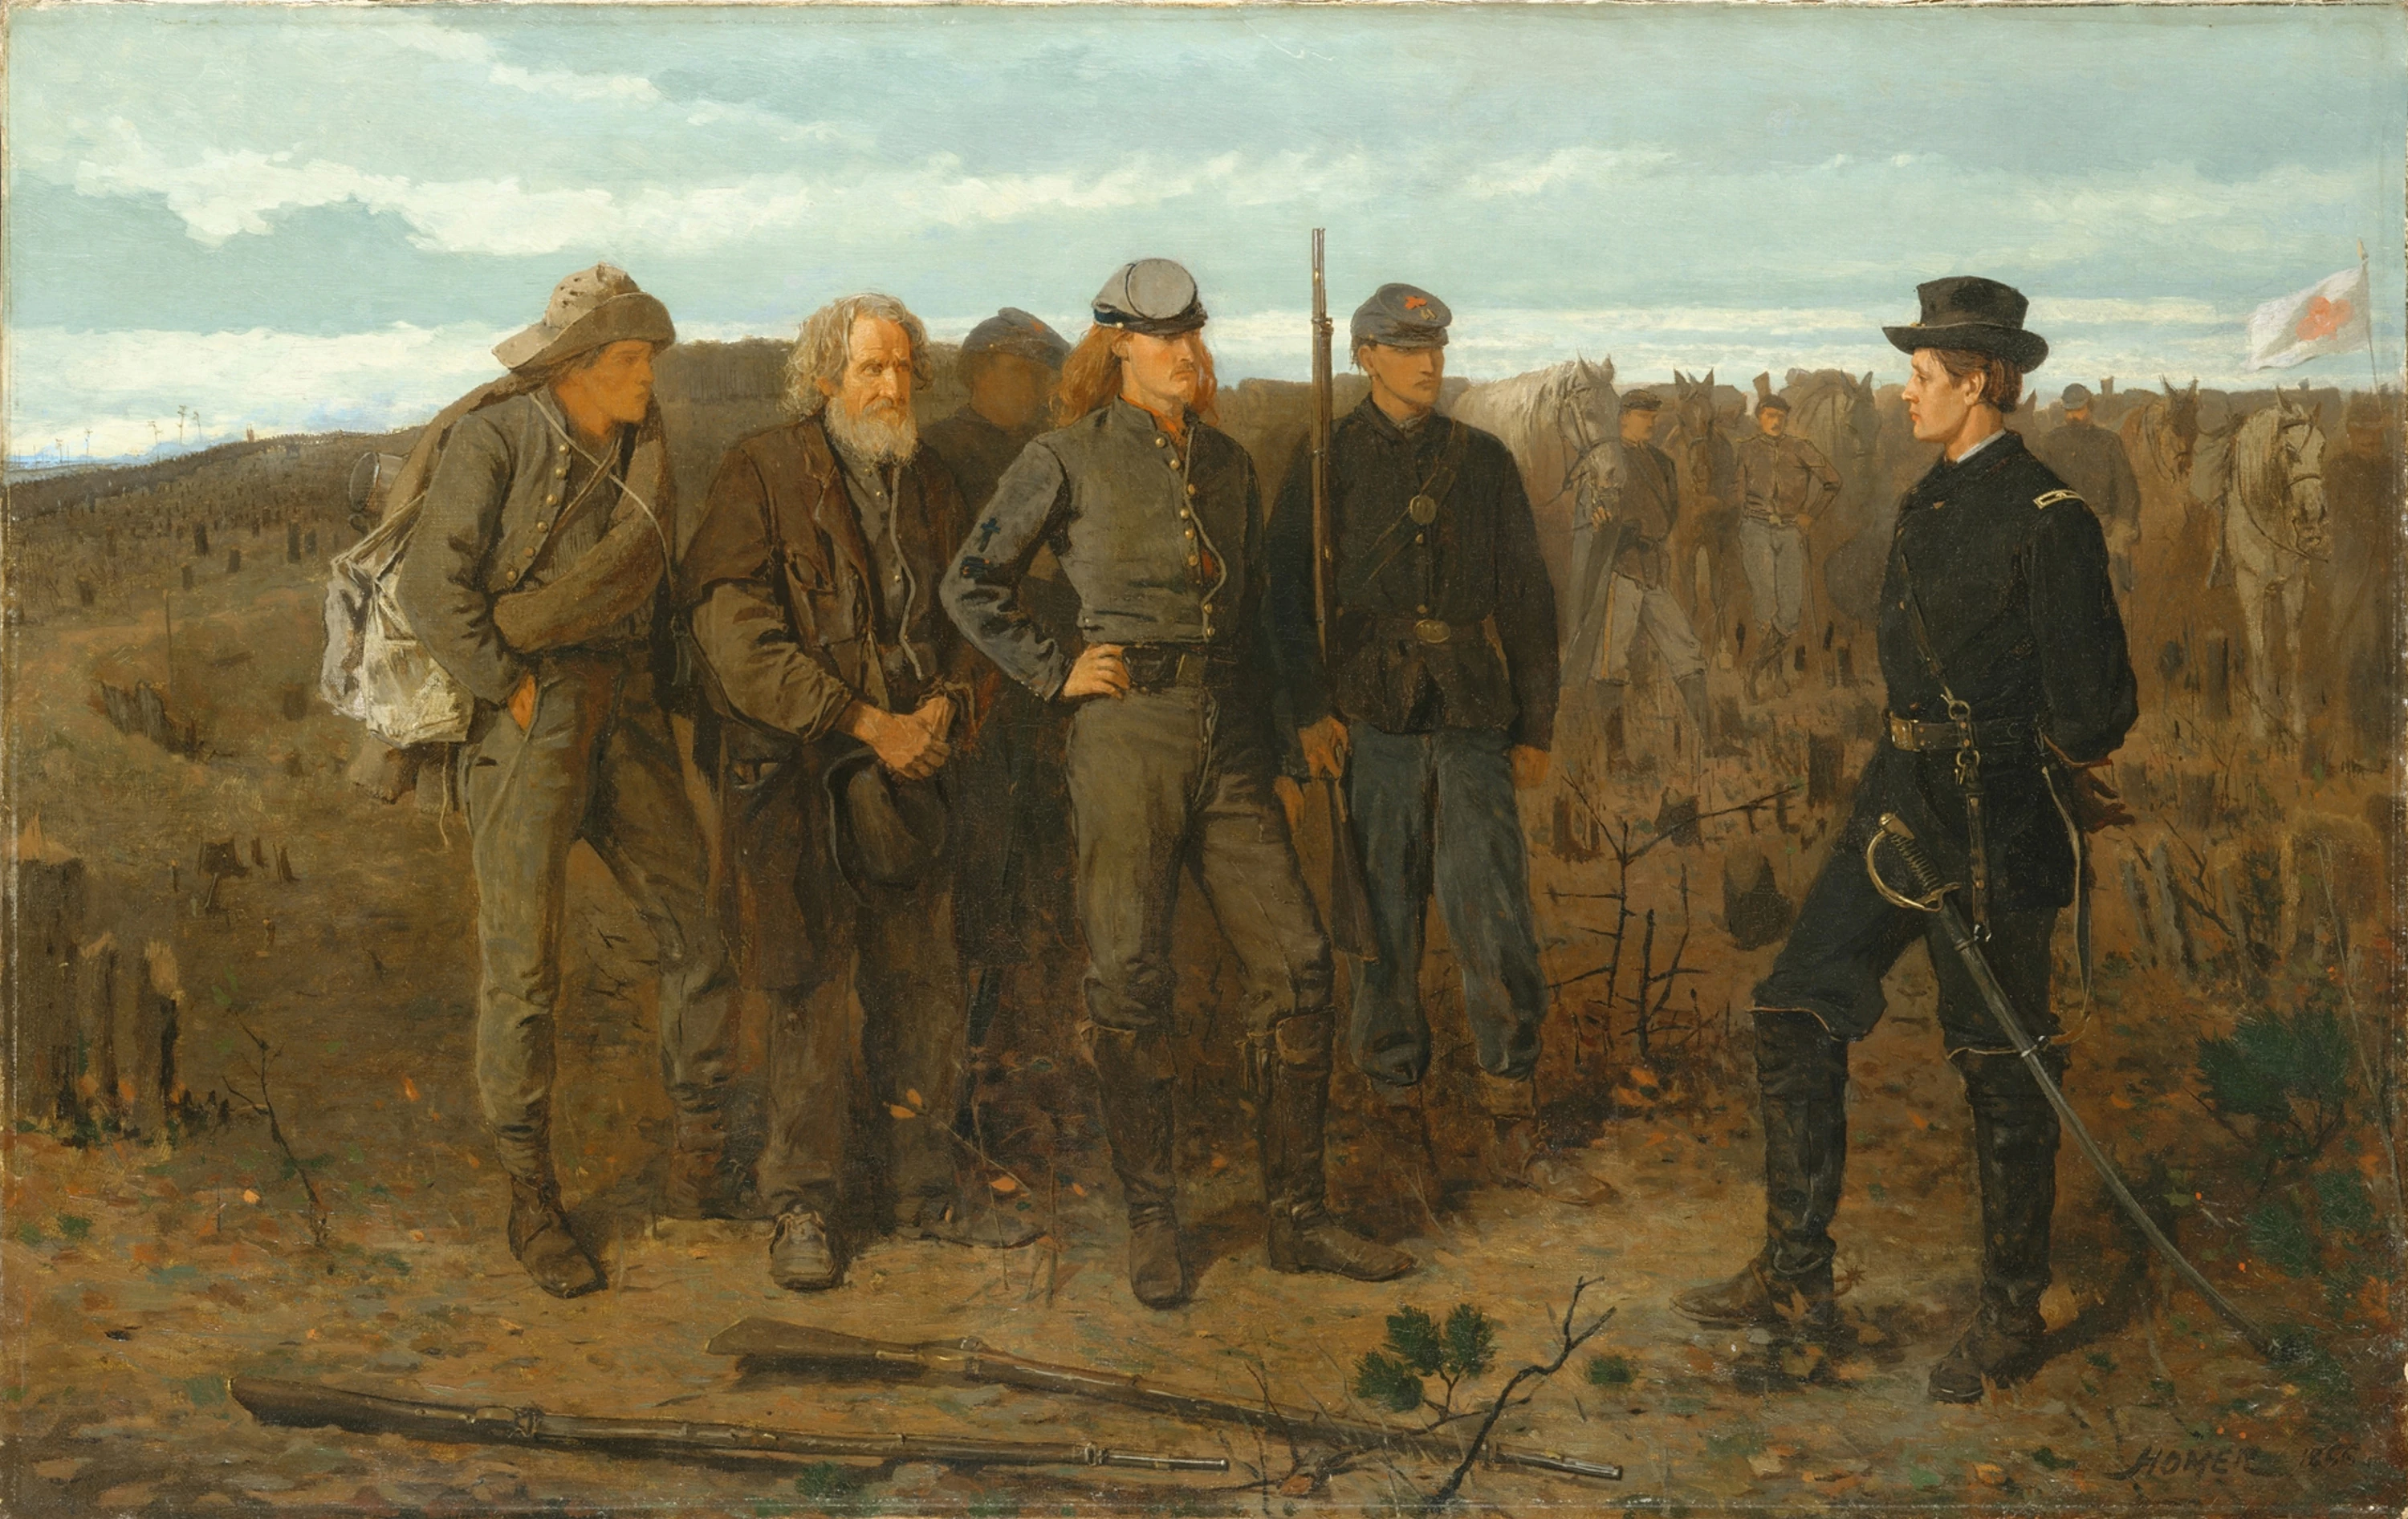 Prisoners from the Front, Winslow Homer